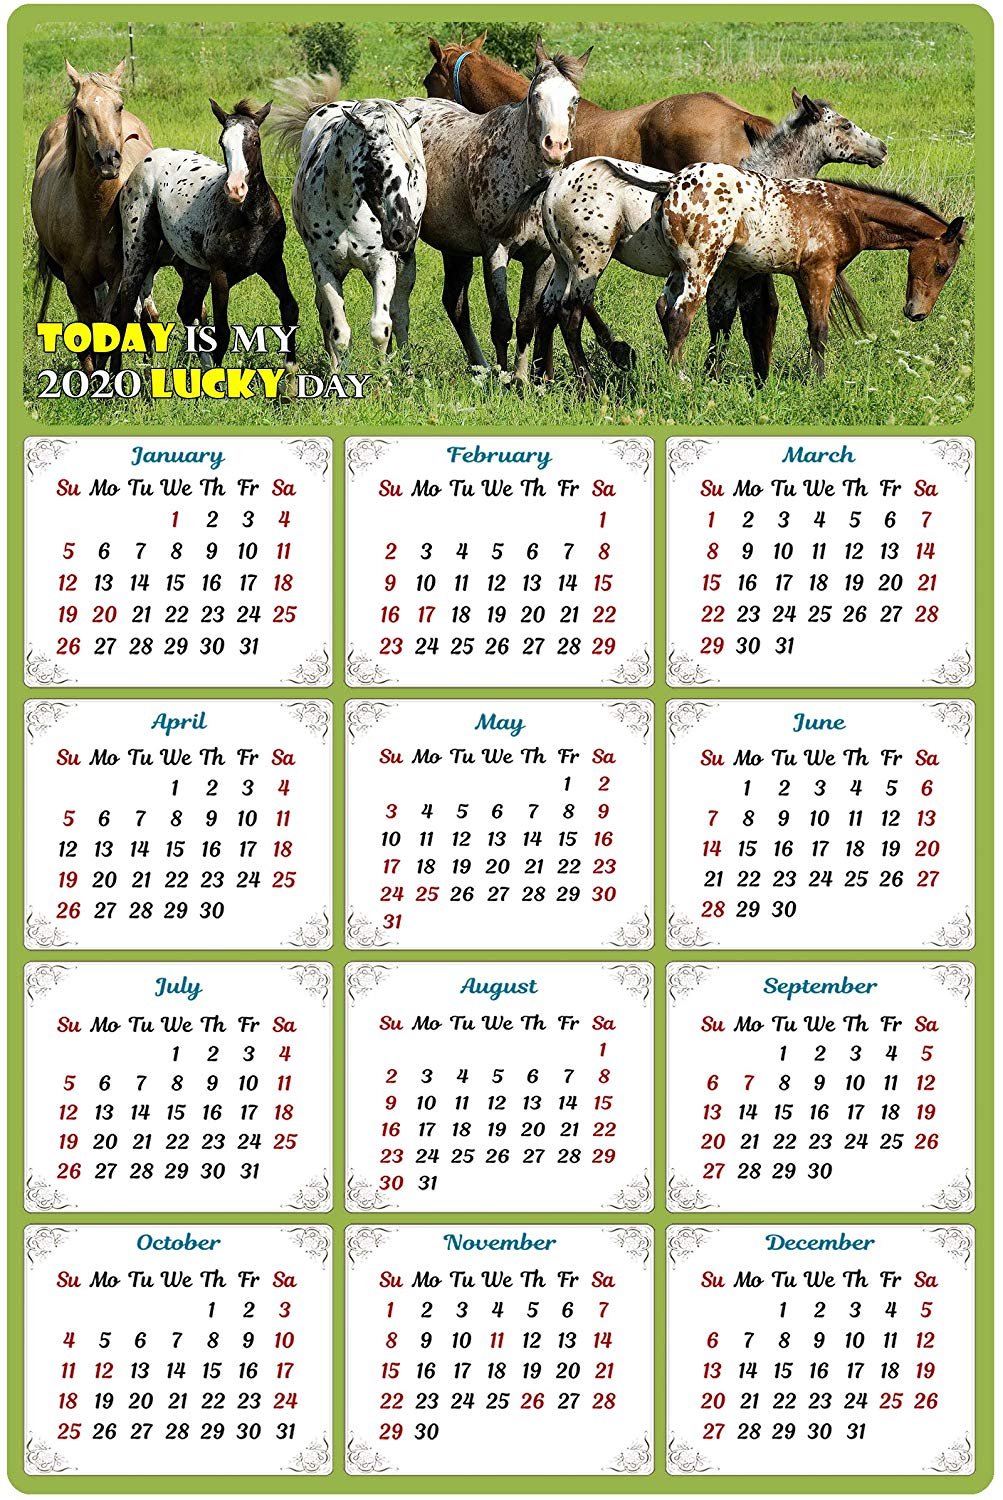 2020 Magnetic Calendar - Calendar Magnets - Today is My Lucky Day - Horses Edition #002